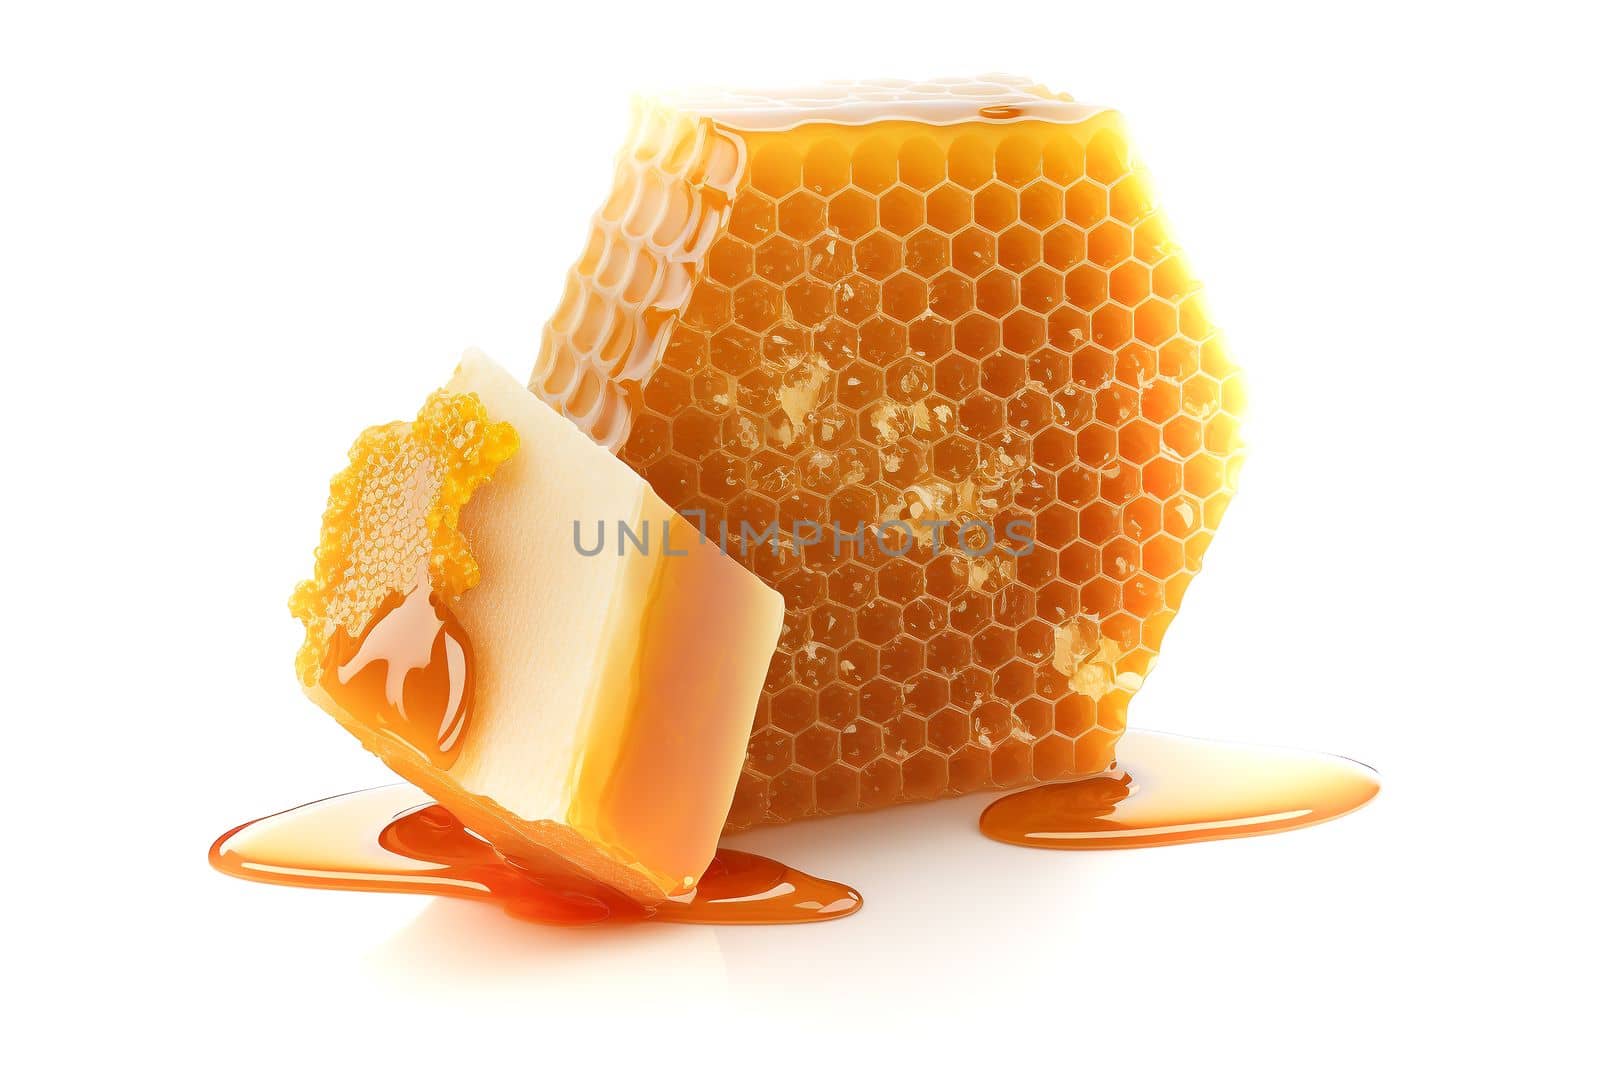 Honeycomb with flowing honey syrup, isolated on a white background